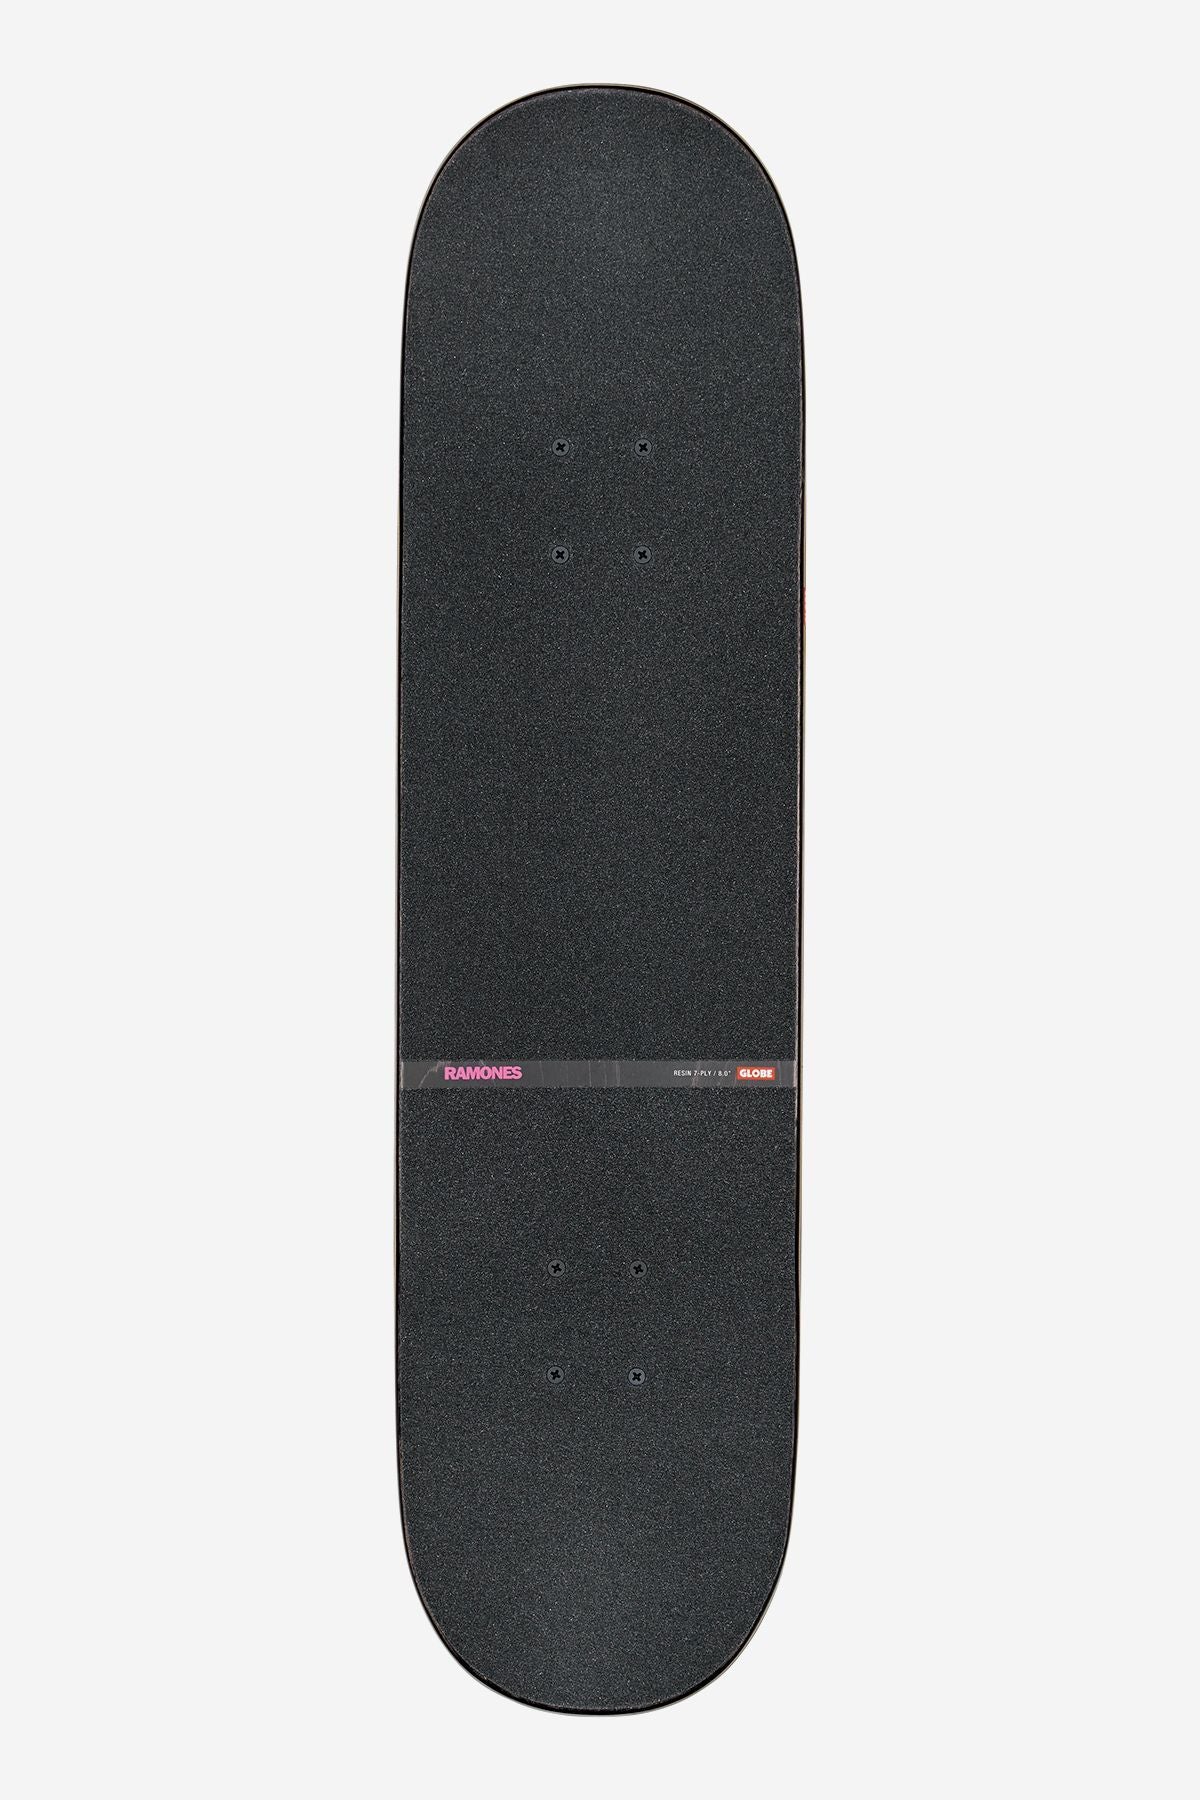 grip tape of G2 Ramones 8.0" Complete - Rocket to Russia